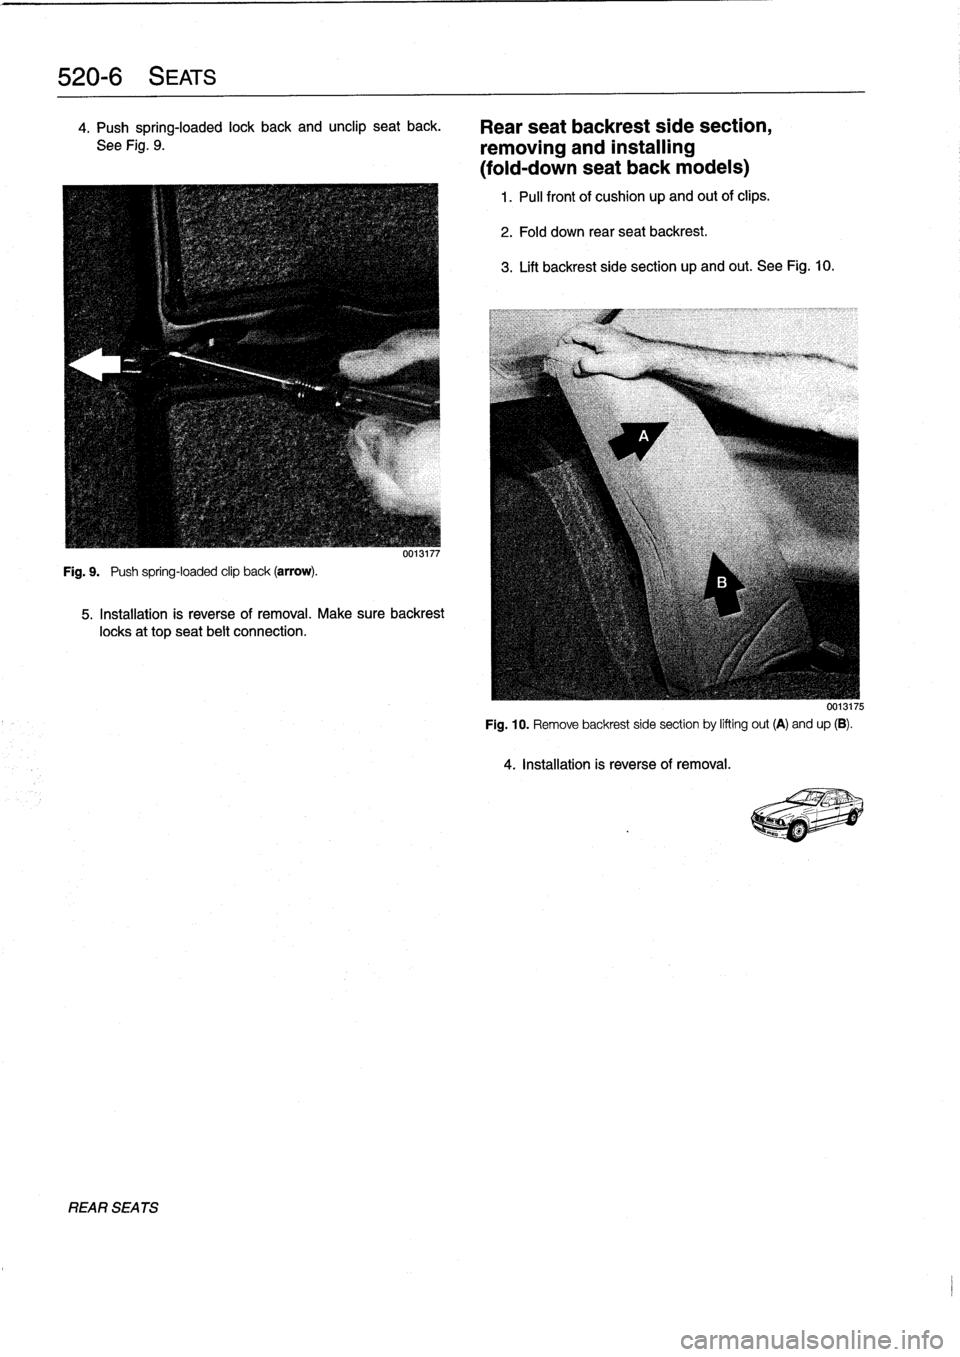 BMW 328i 1997 E36 Workshop Manual 
520-
6
SEATS

4
.
Push
spring-loaded
lock
back
and
unclip
seat
back
.

See
Fig
.
9
.

Fig
.
9
.

	

Push
spring-loaded
clip
back
(arrow)
.

UU13117

5
.
Installation
is
reverse
of
removal
.
Make
sure